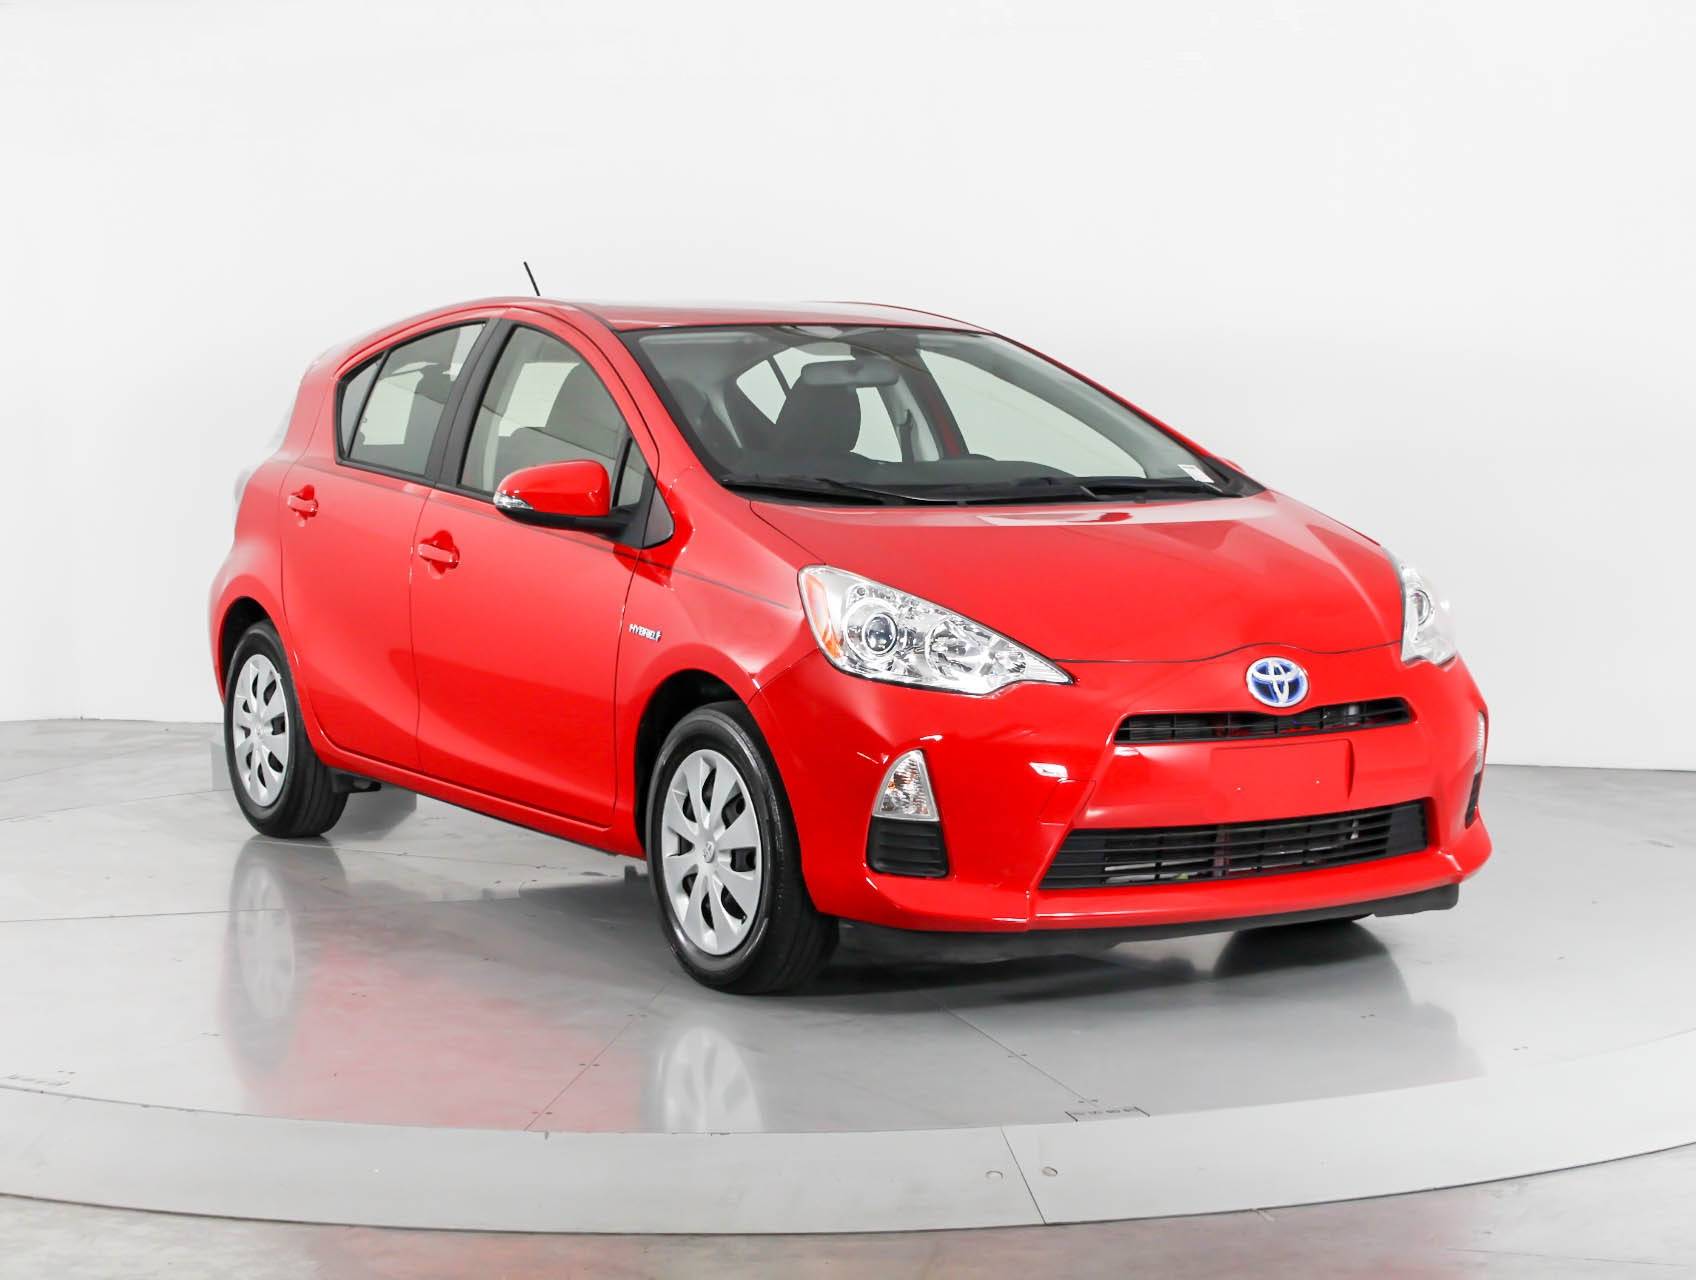 Florida Fine Cars - Used TOYOTA PRIUS C 2014 WEST PALM TWO